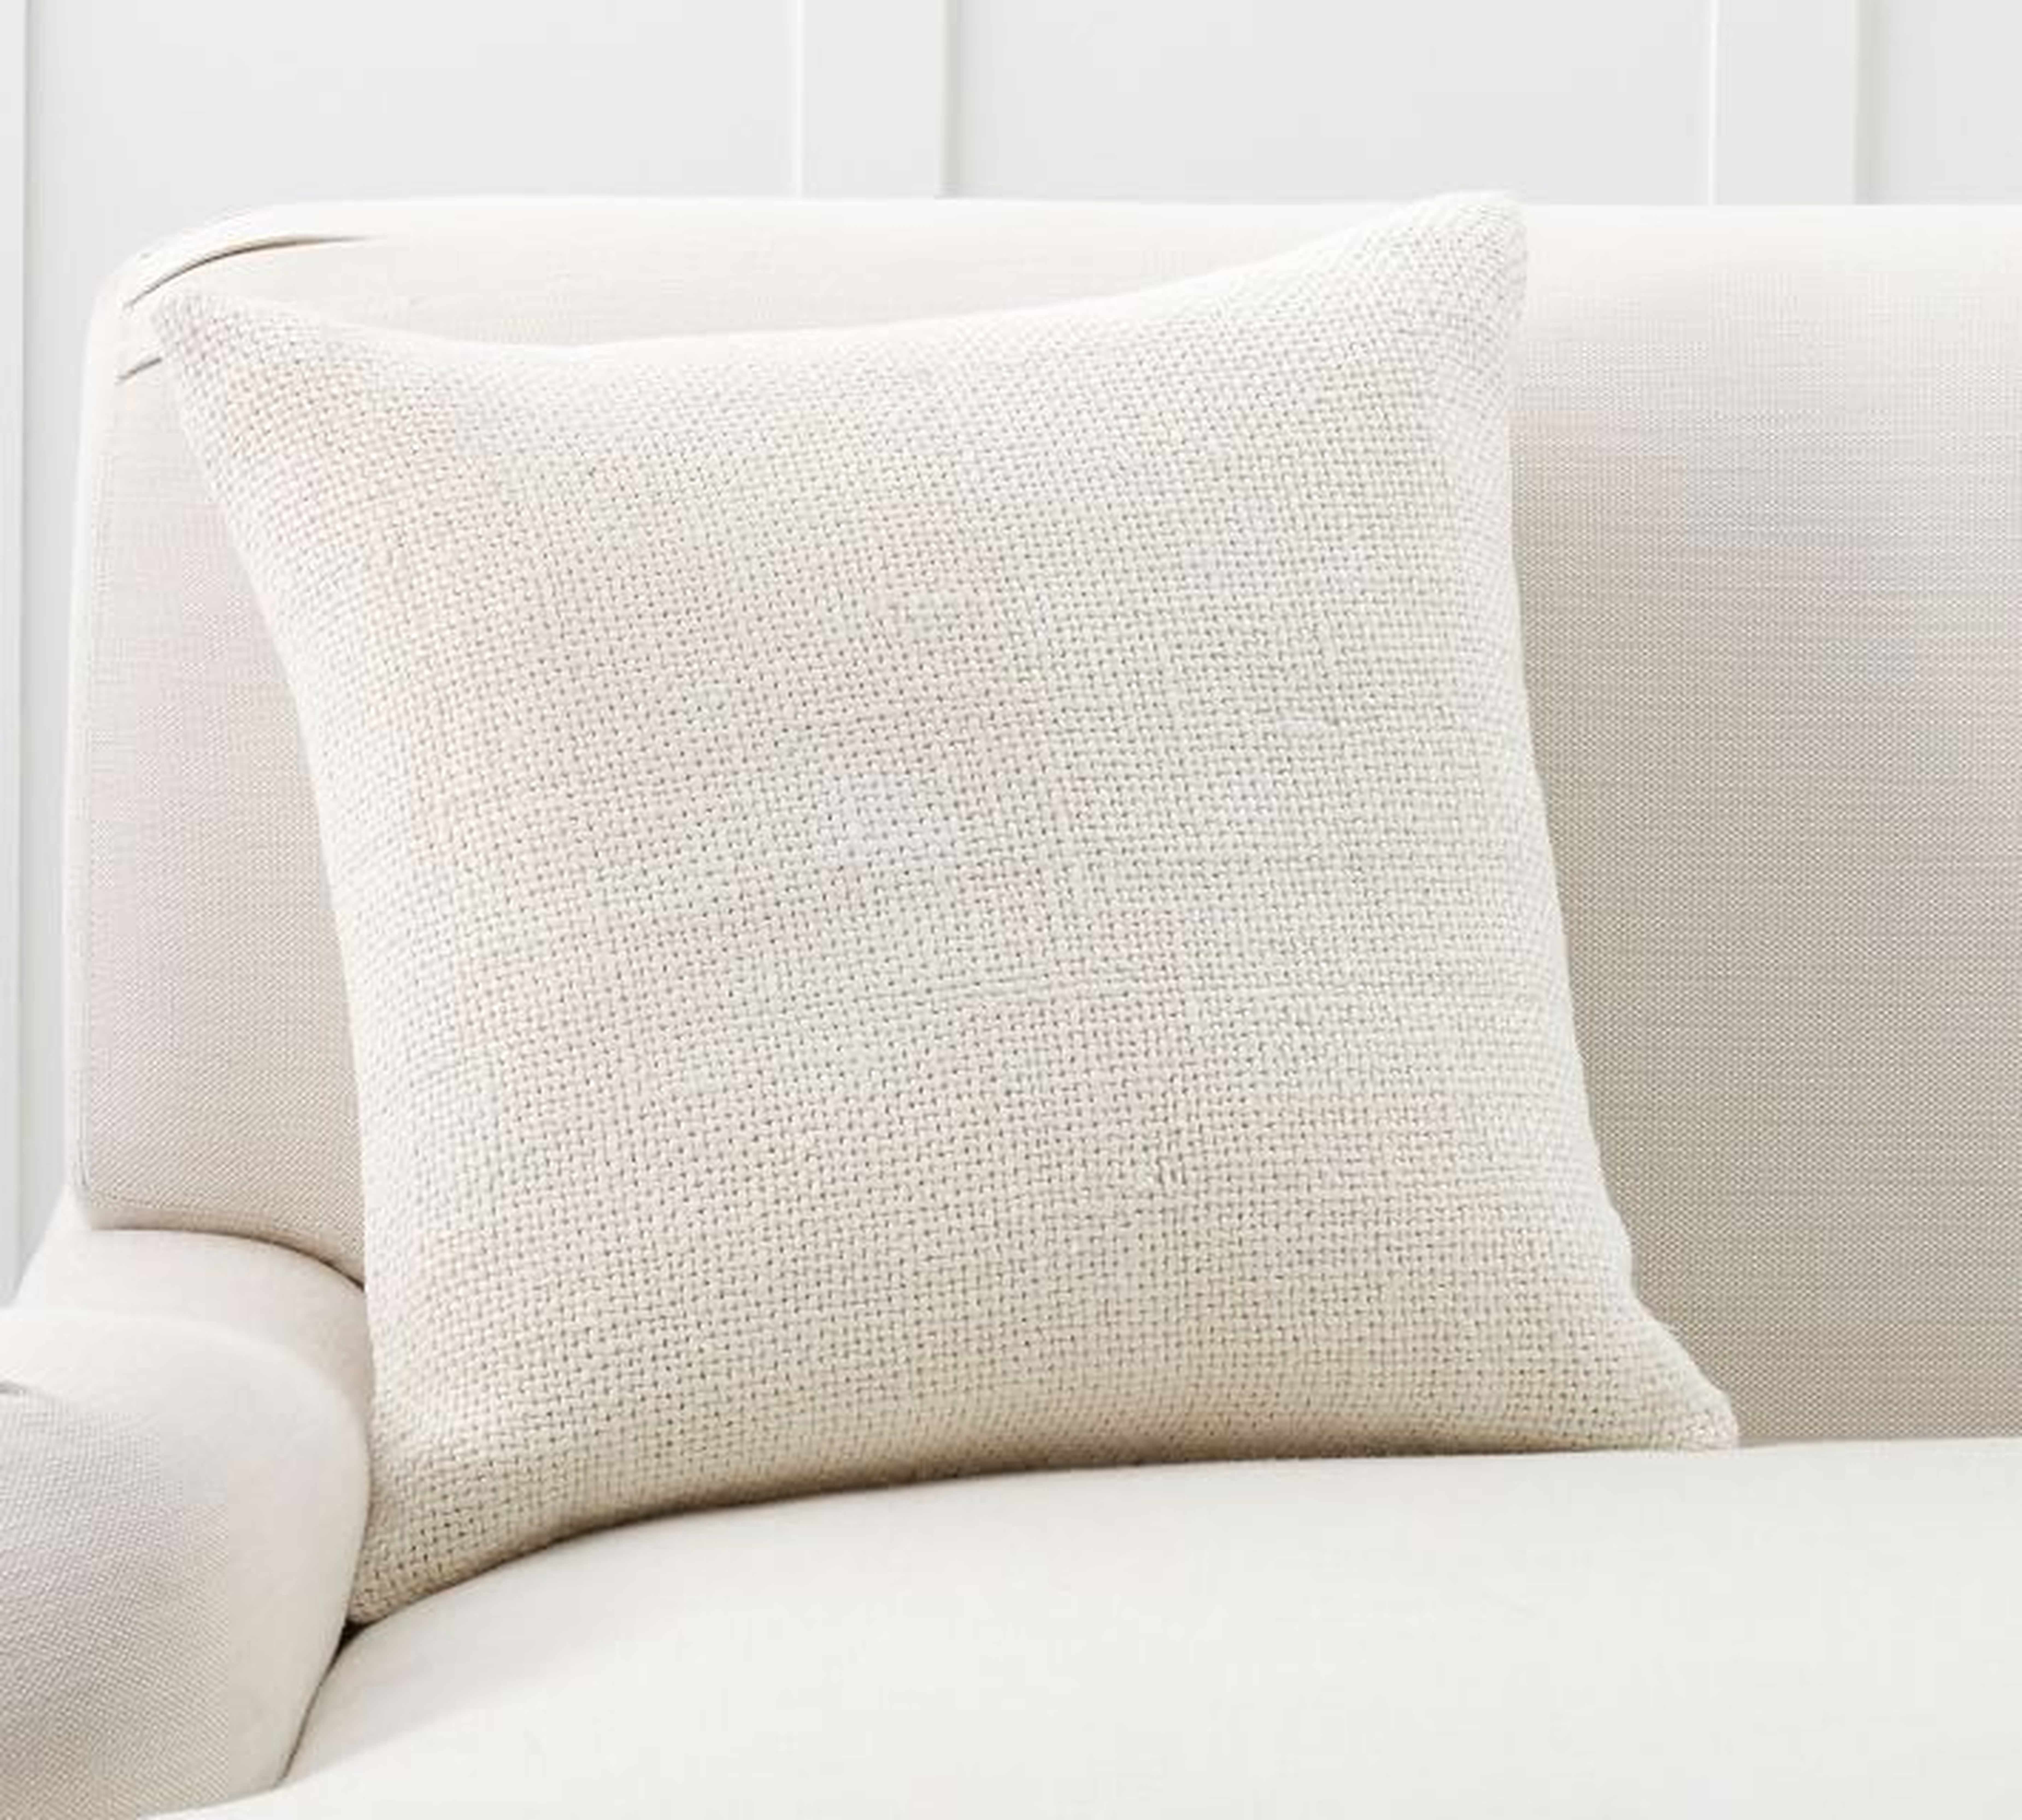 Faye Textured Linen Pillow Cover, 20", Ivory - Pottery Barn